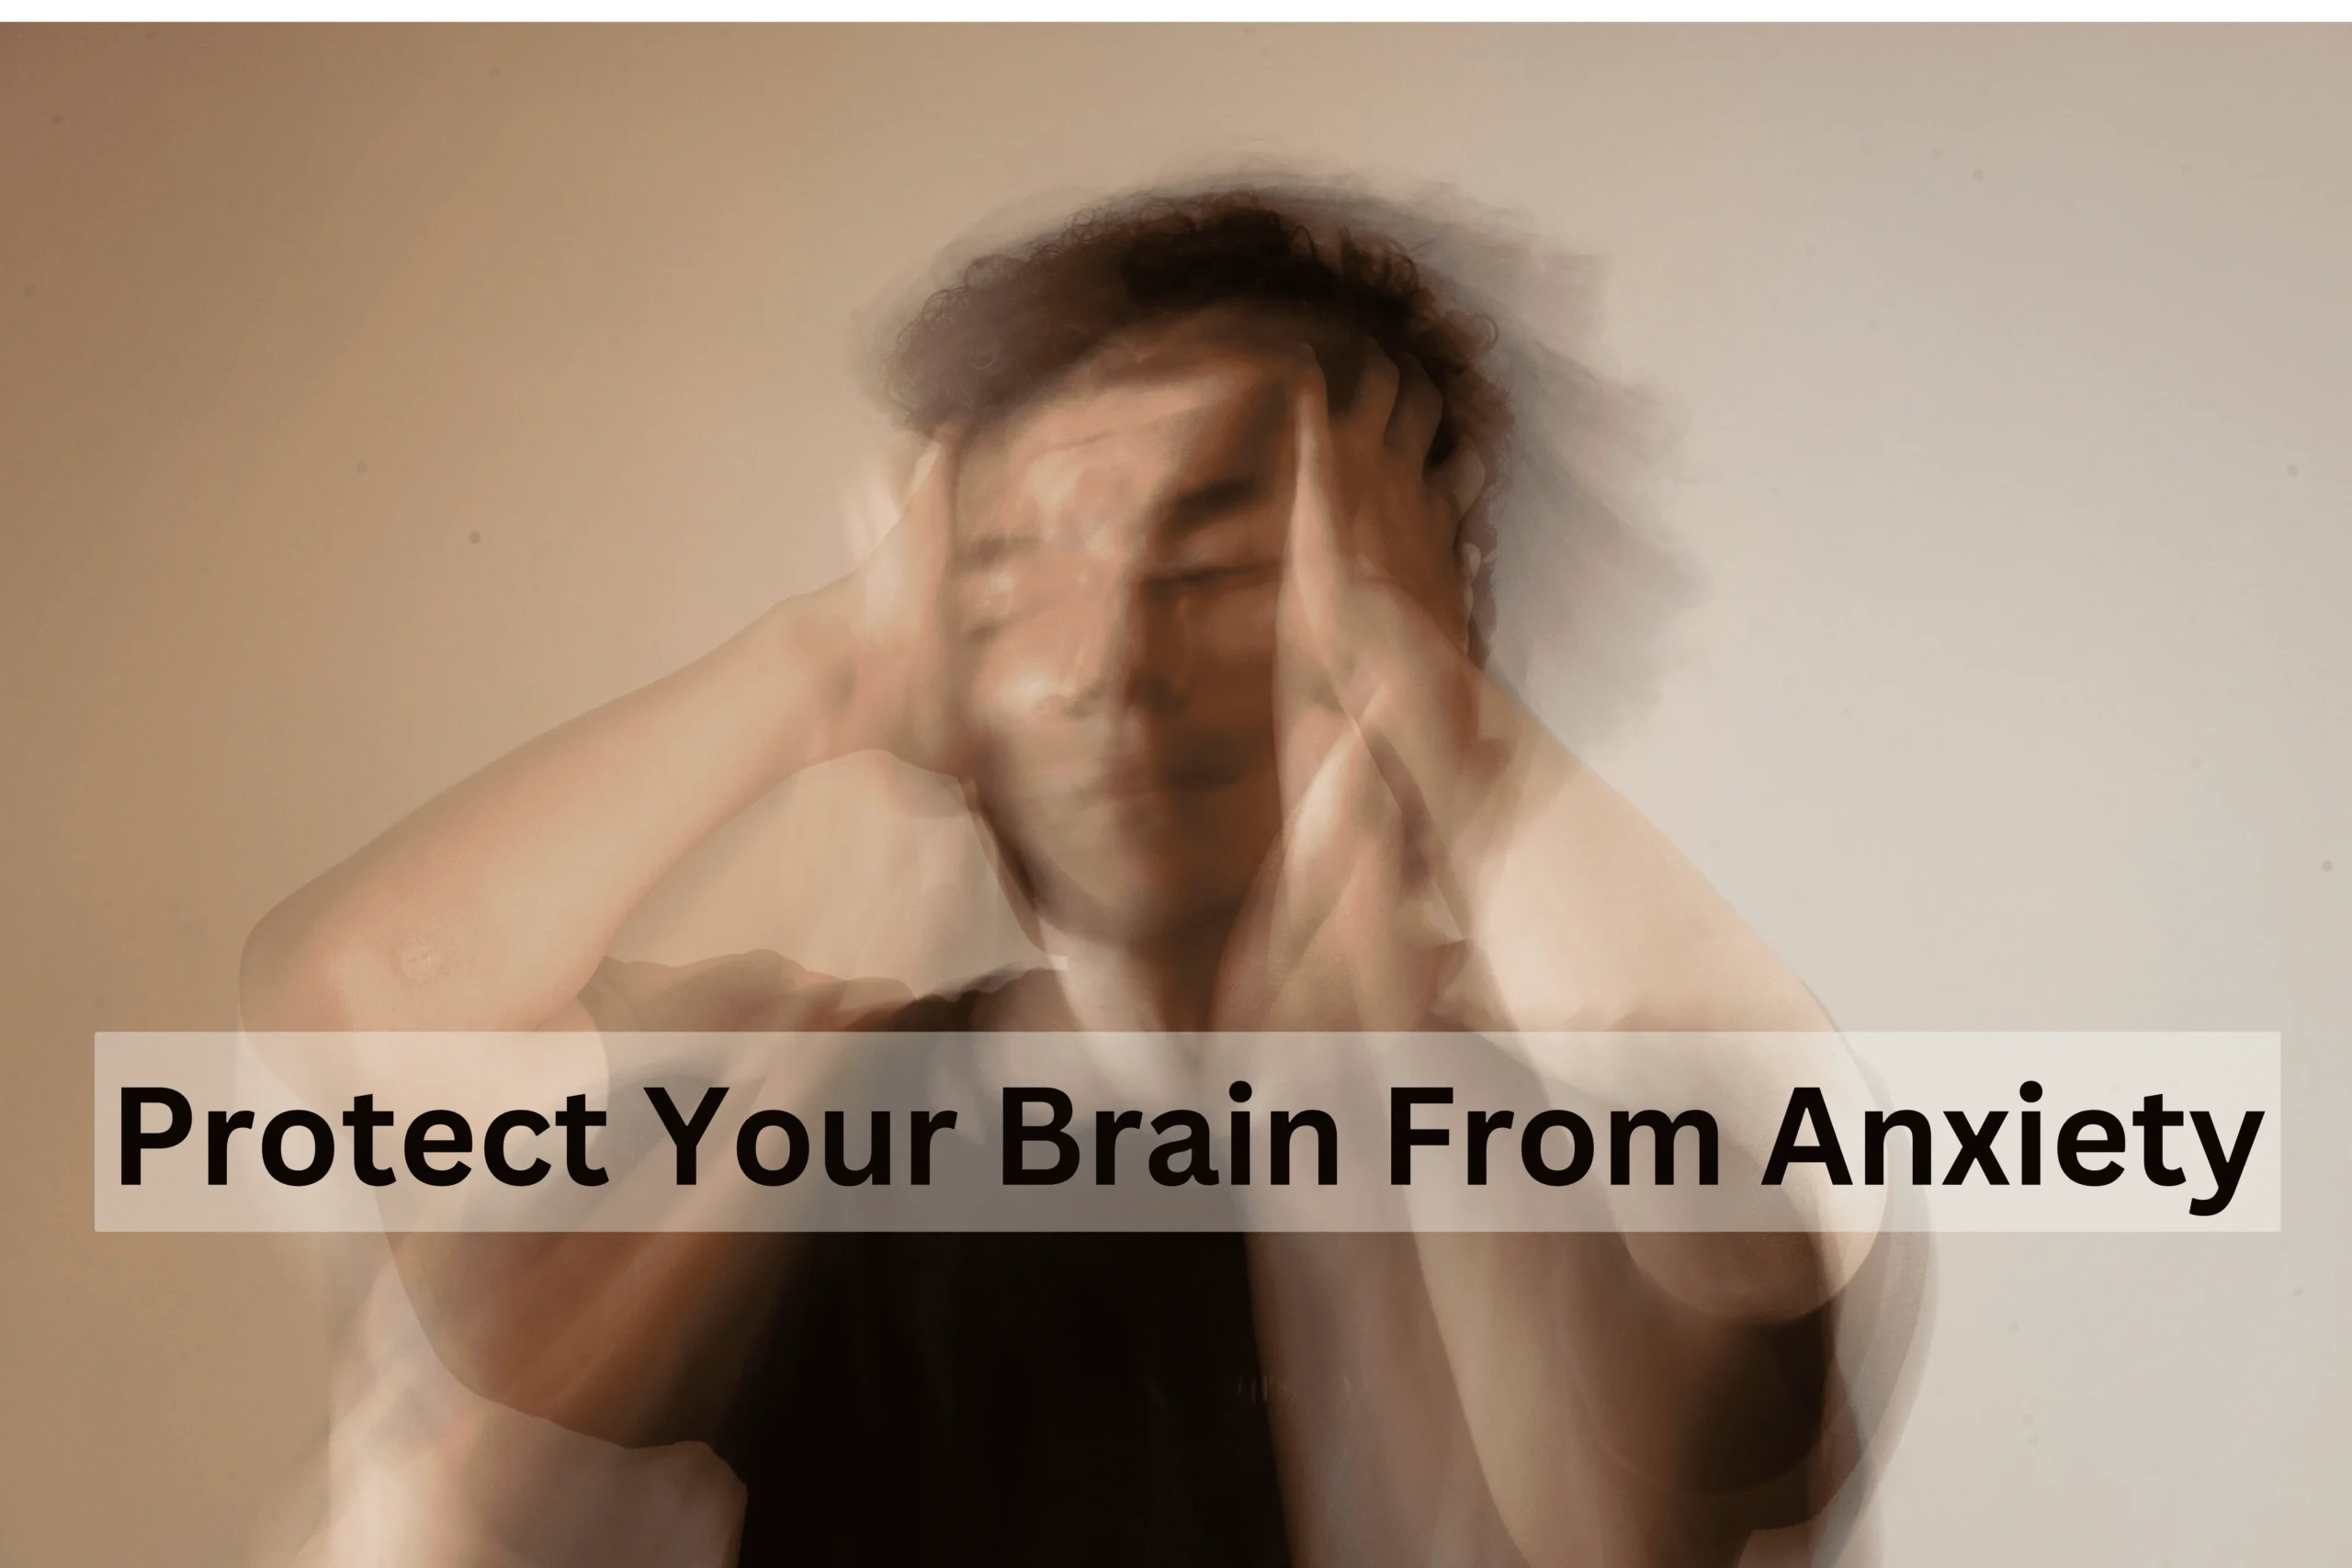 Want To Protect Your Brain From Anxiety